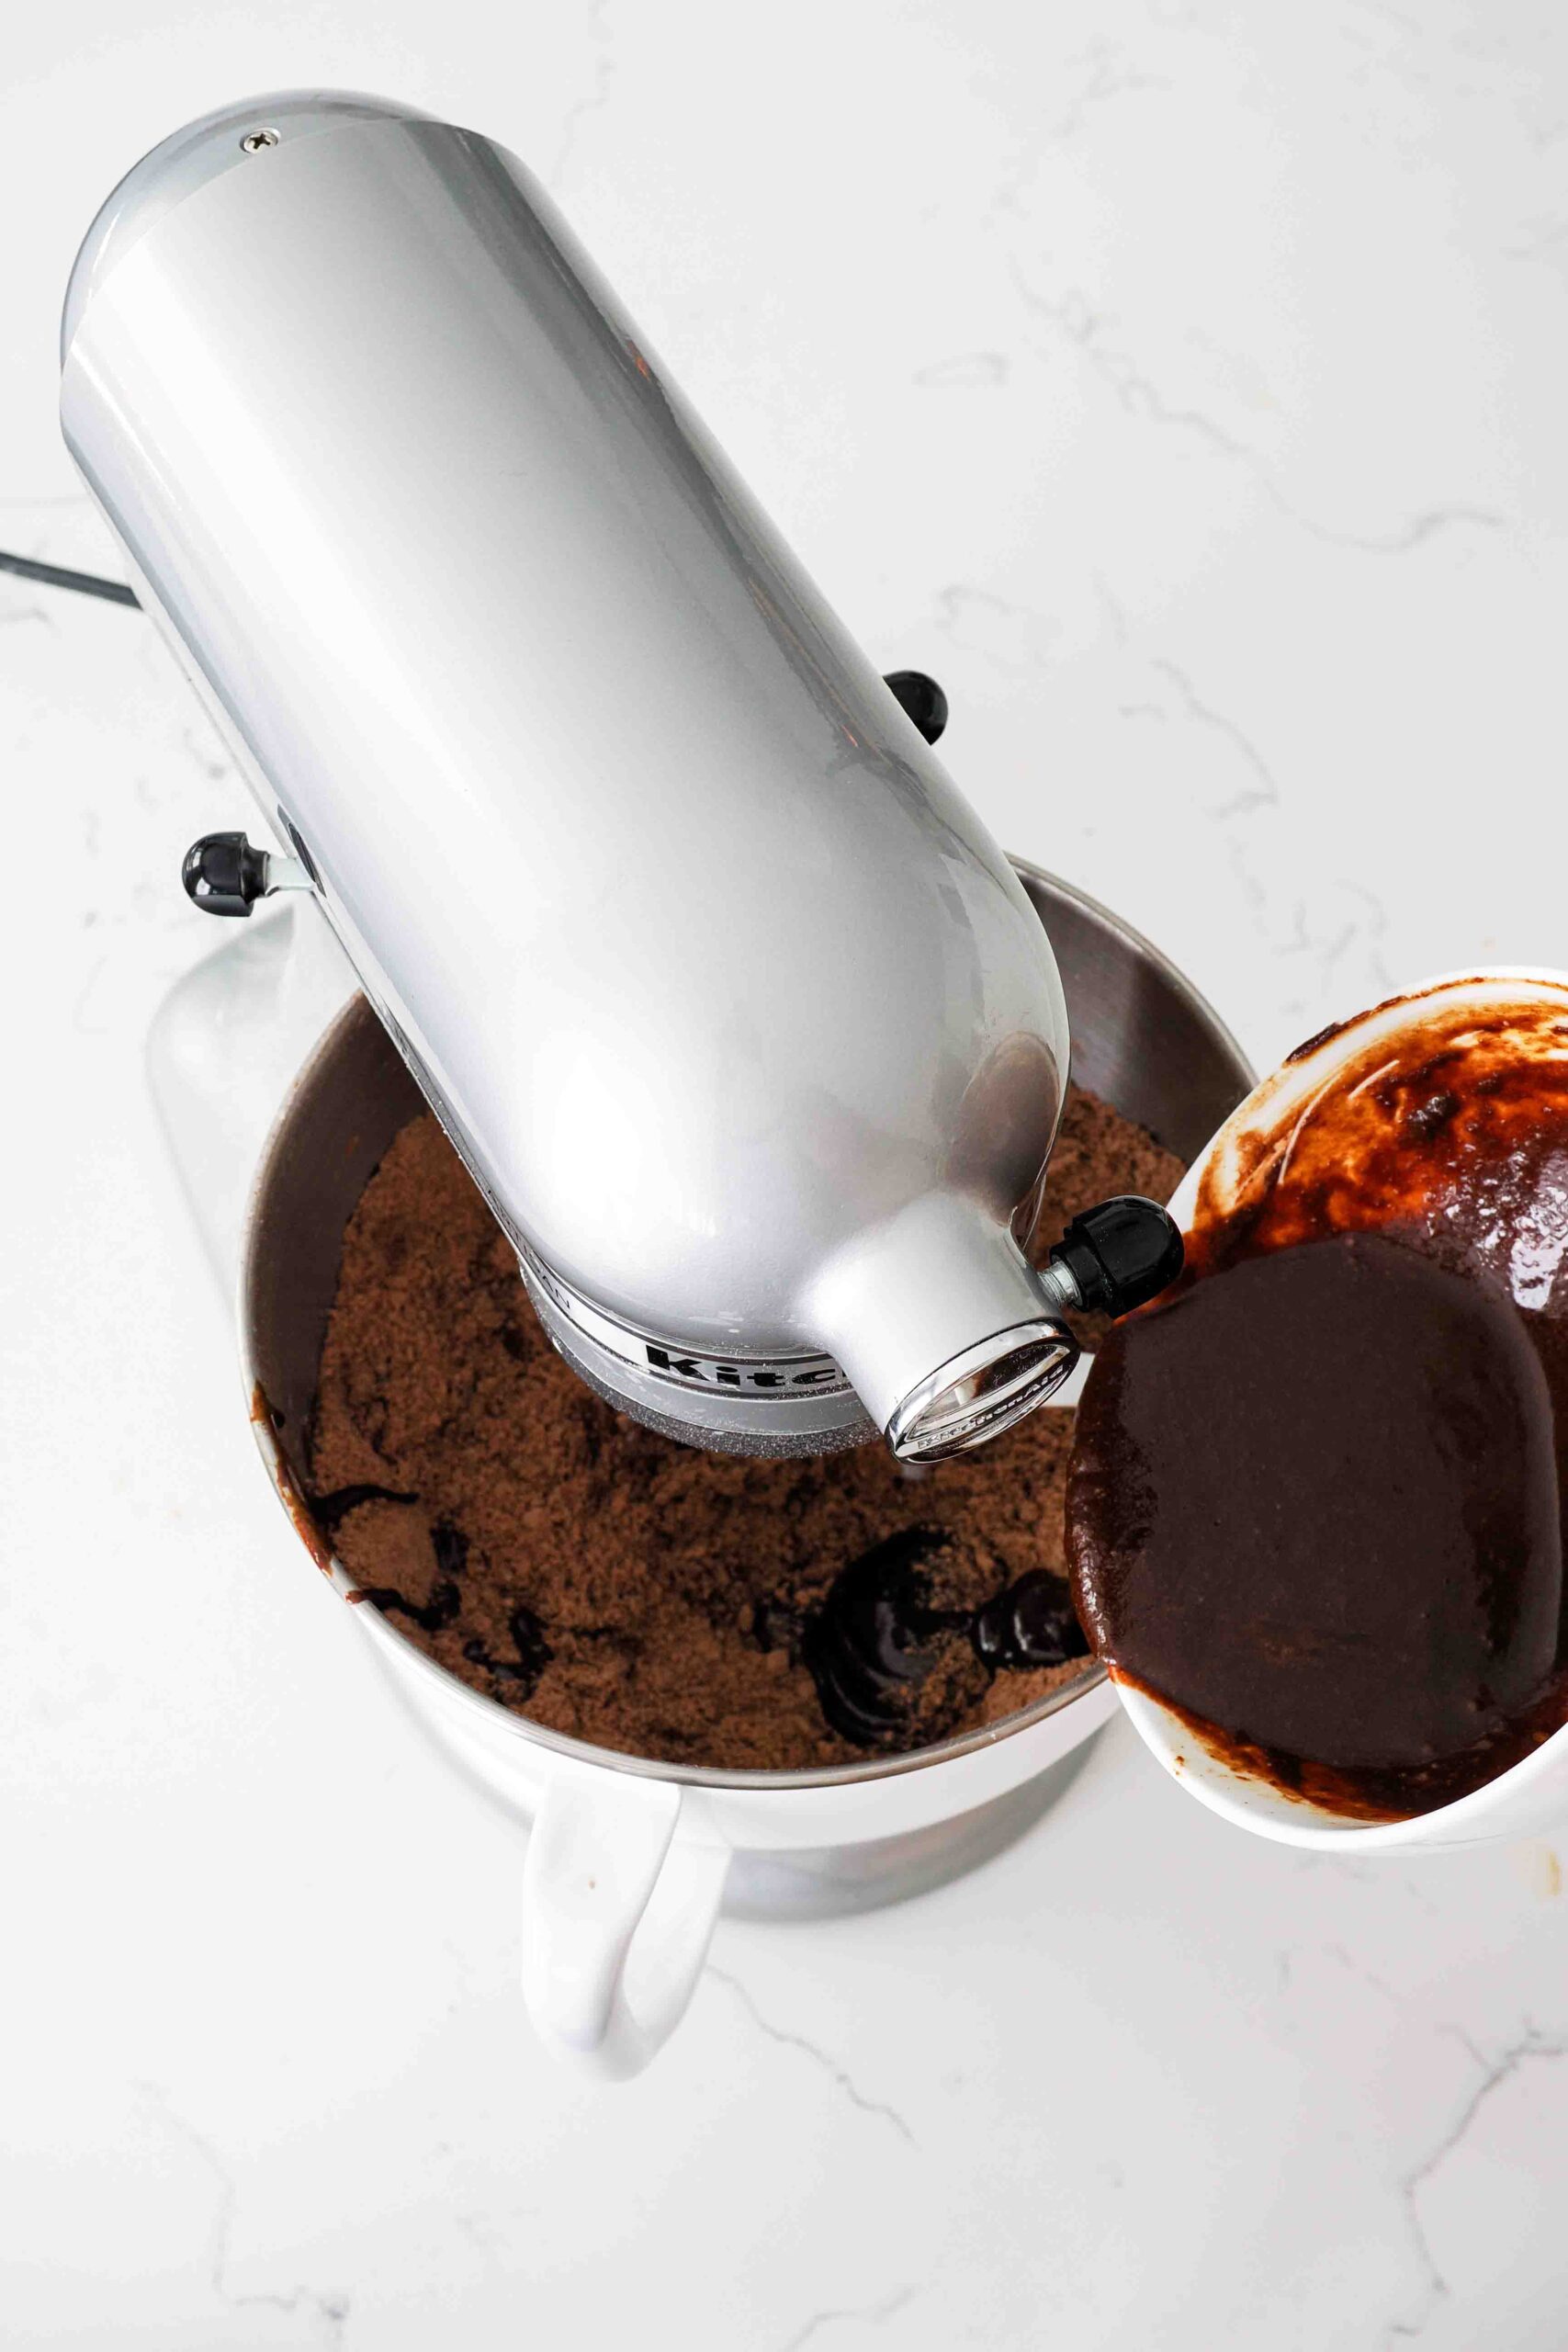 Dark liquid is poured into the bowl of a stand mixer with cocoa-colored dough.